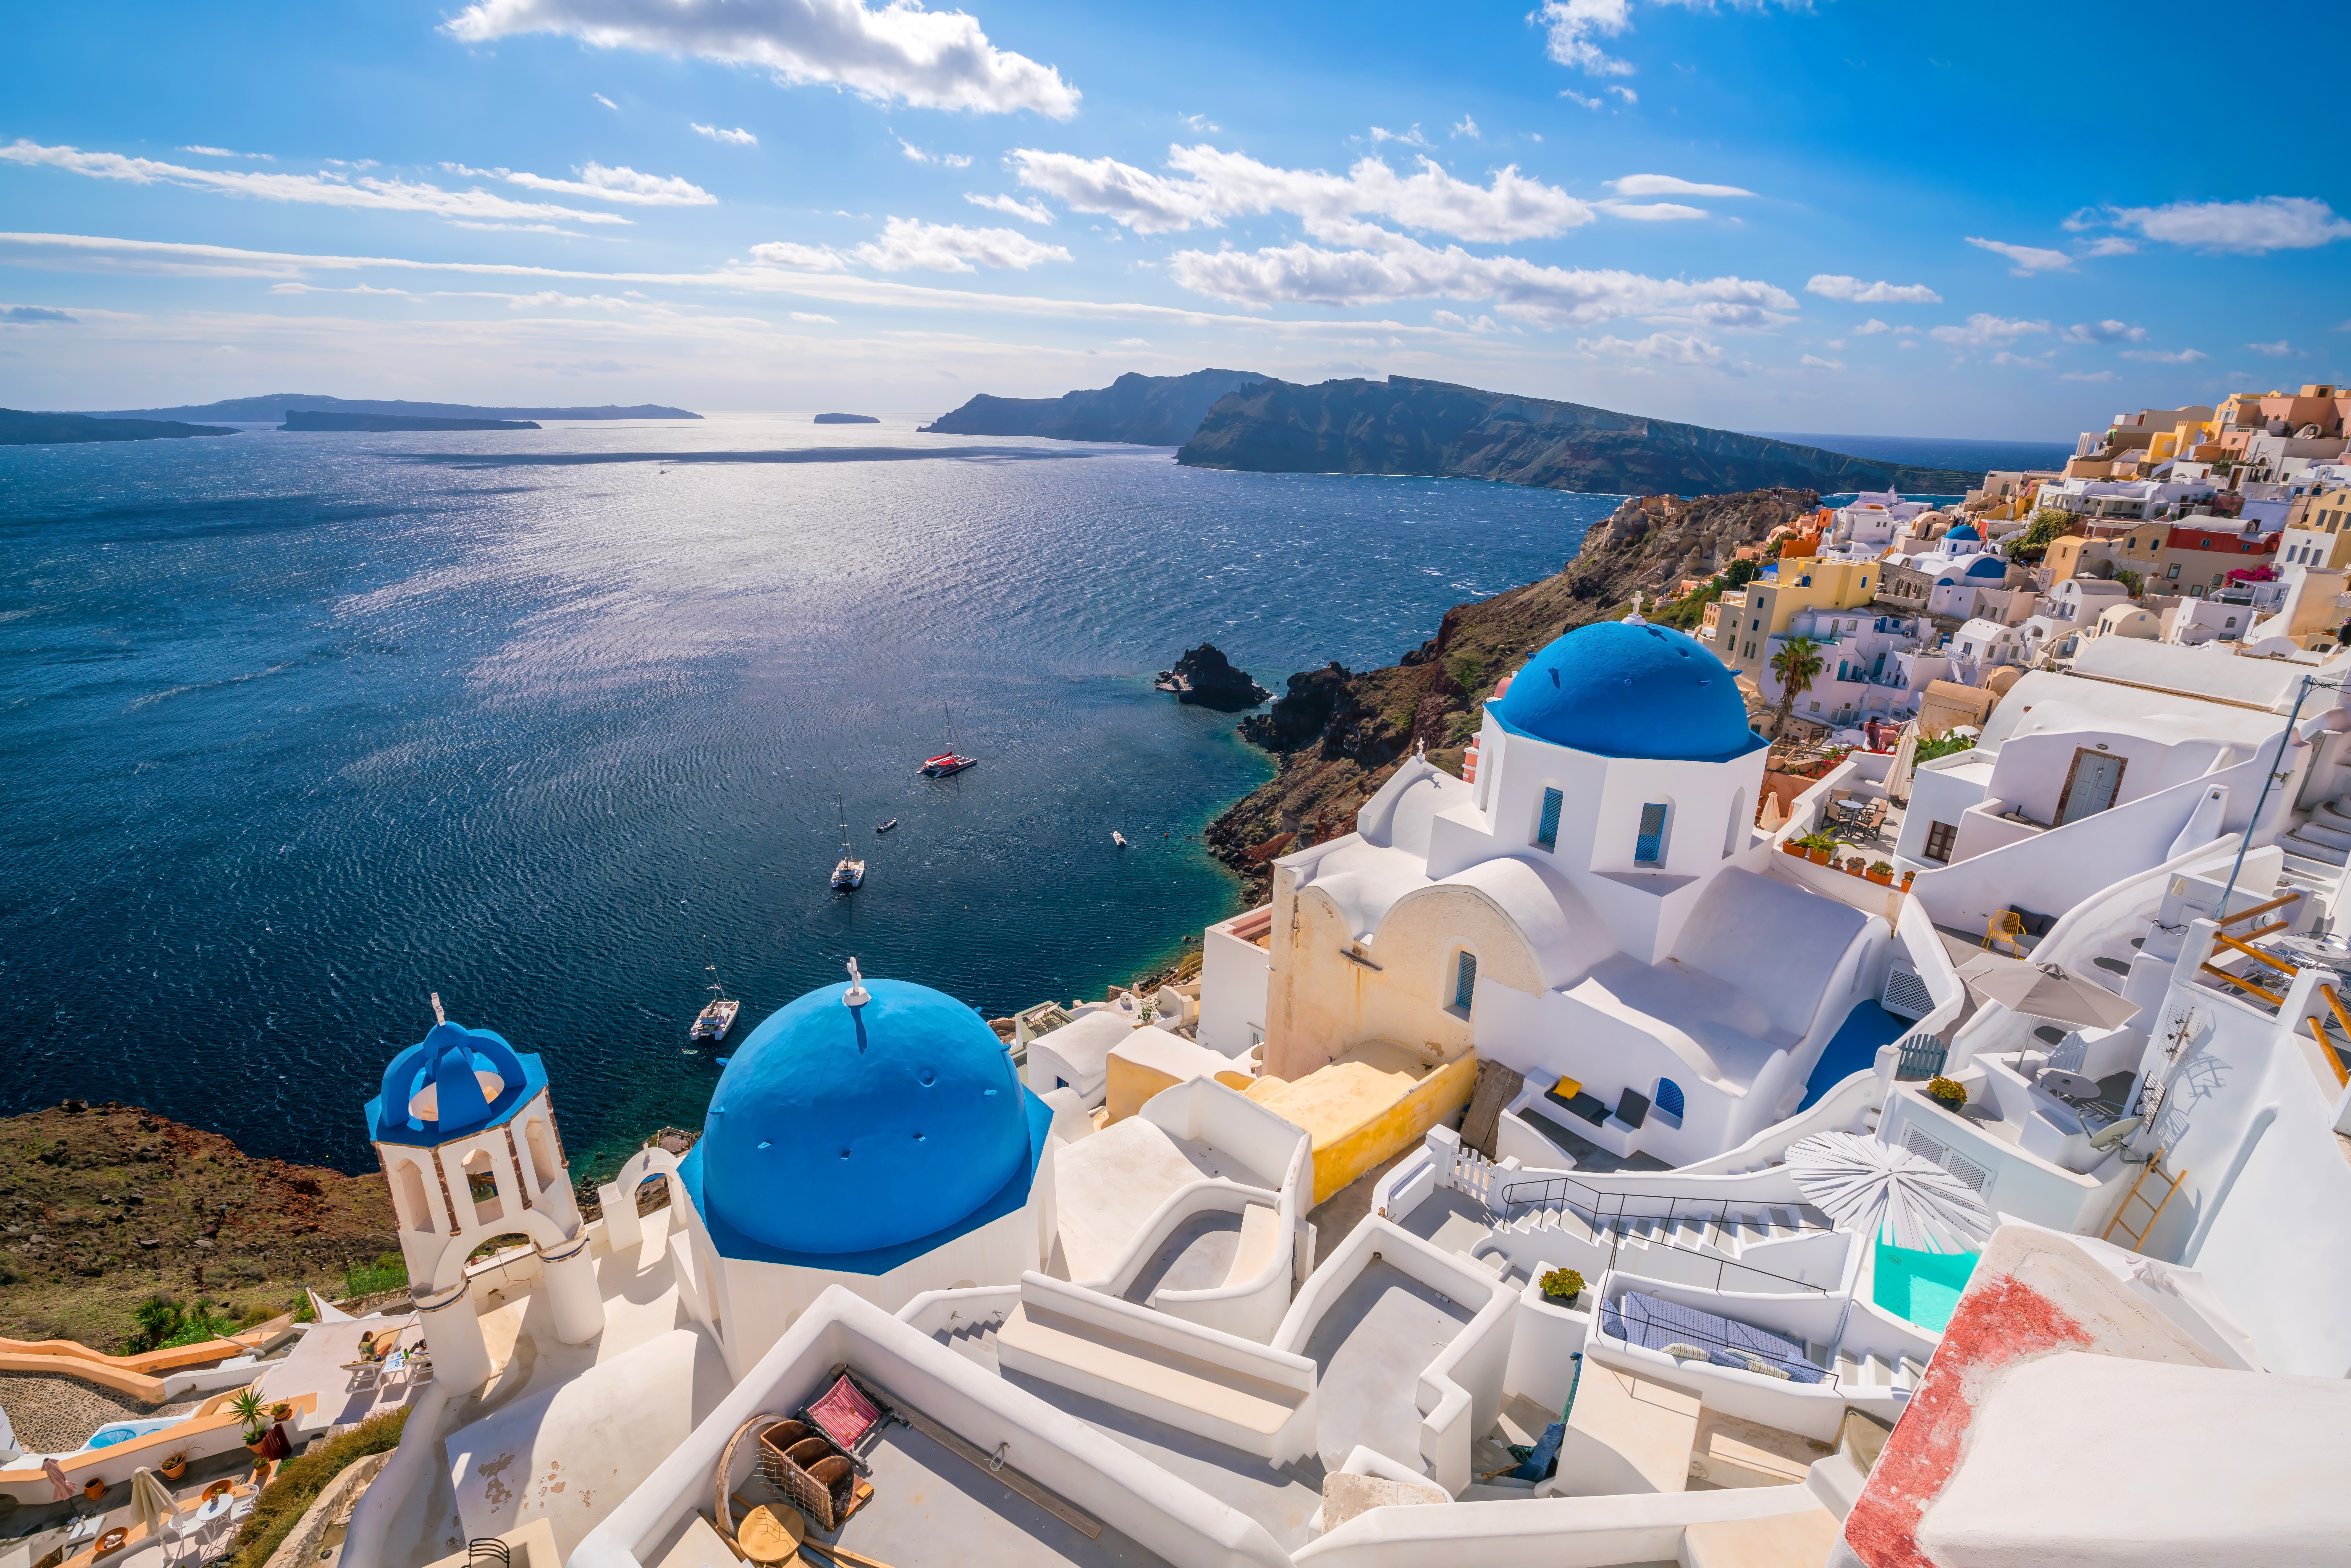 Things to Do on a Romantic Cruise in the Eastern Mediterranean - Santorini Island